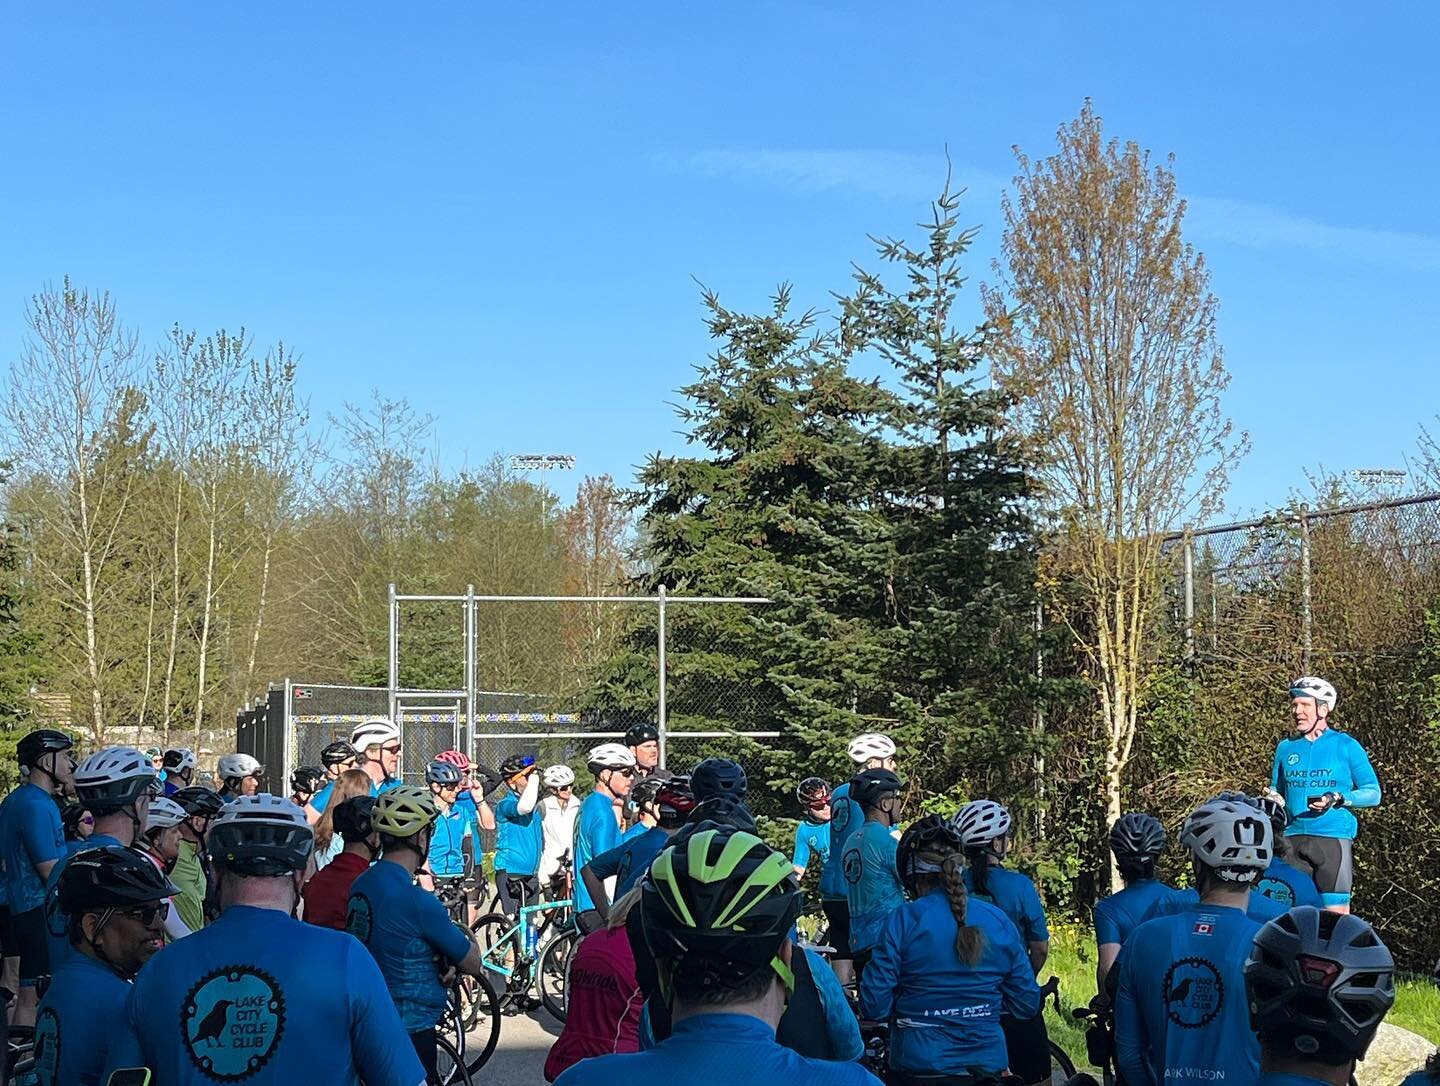 2023 Season Opening Club Ride - welcome back LC3ers! Great to see to old gang for a fun ride to open the road season - #lakecitycycleclub #cycling #cyclingbc